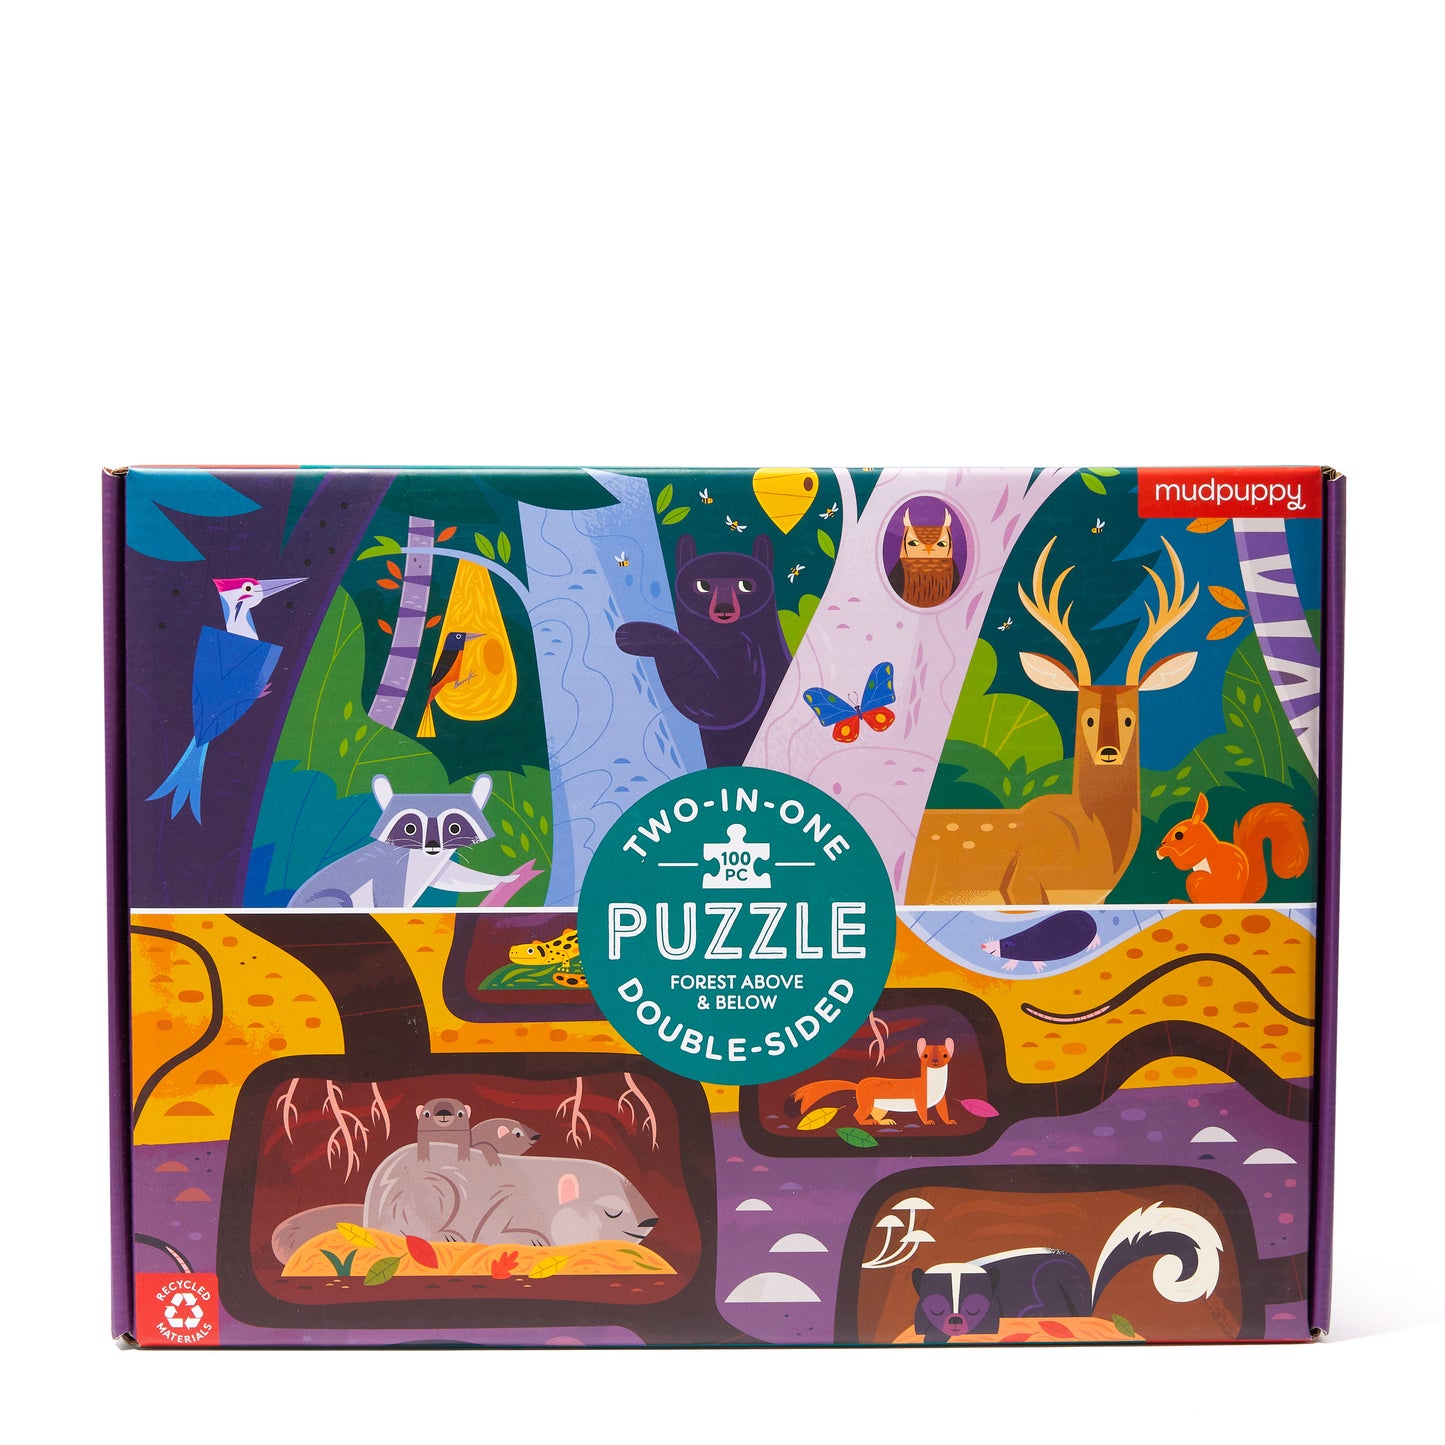 FOREST ABOVE & BELOW 100 PC PUZZLE